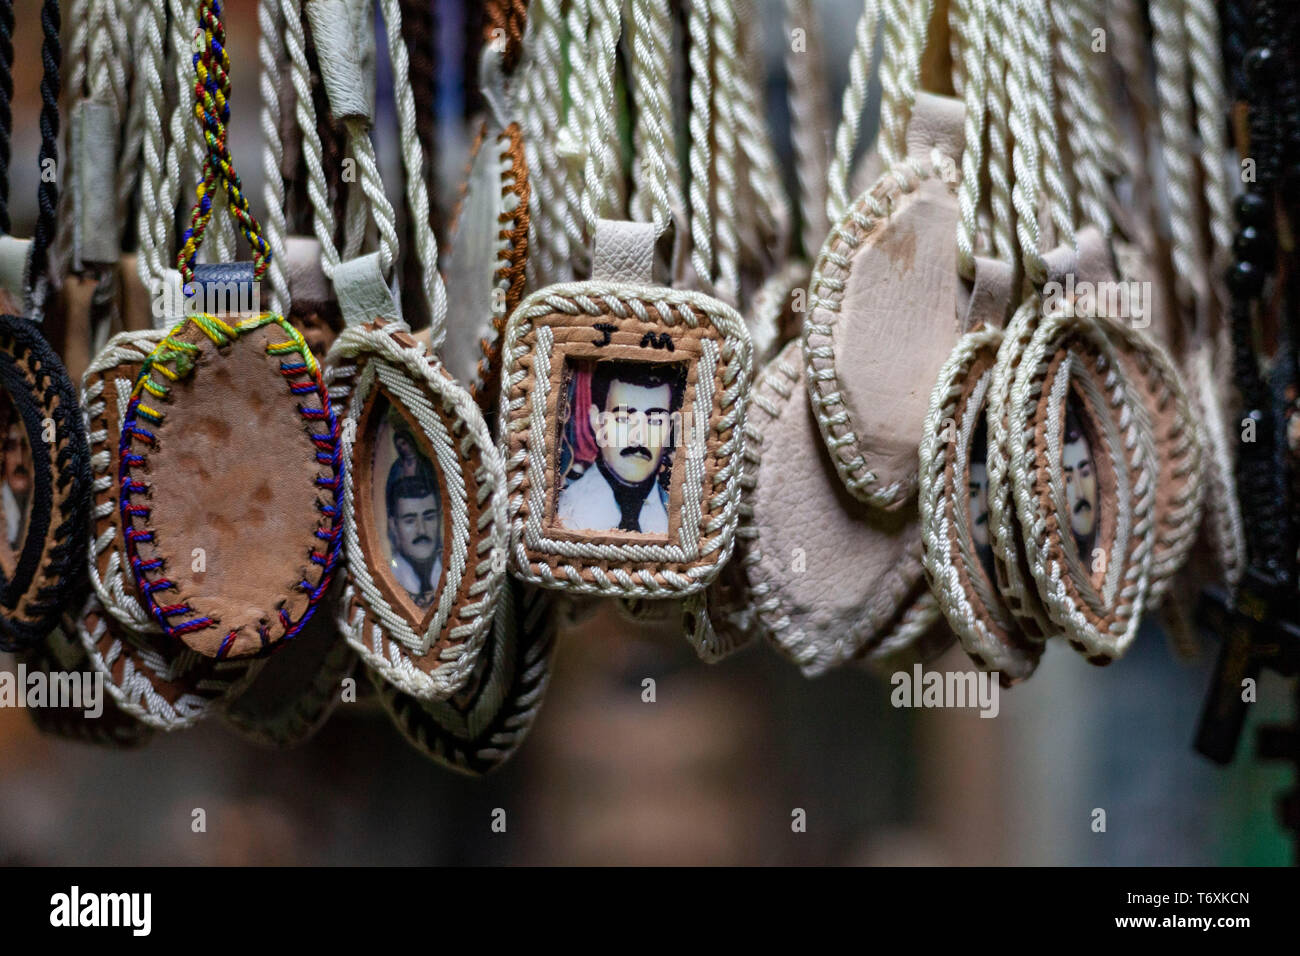 03 May 2019, Mexico, Culiacán: Pendants with a picture of Jesus Malverde are offered for sale. Malverde is considered the saint of drug bosses in Mexico. On the occasion of his 110th anniversary of death on 03.05.2019 numerous faithful gathered in his native town in the federal state of Sinaloa. Malverde, who is not recognized as a saint by the Catholic Church, is said to have been a highwayman during his lifetime. Many Mexicans worship him as a kind of Robin Hood. According to oral tradition, he robbed the rich families in the Sinaloa region and then distributed the booty among the poor. The  Stock Photo